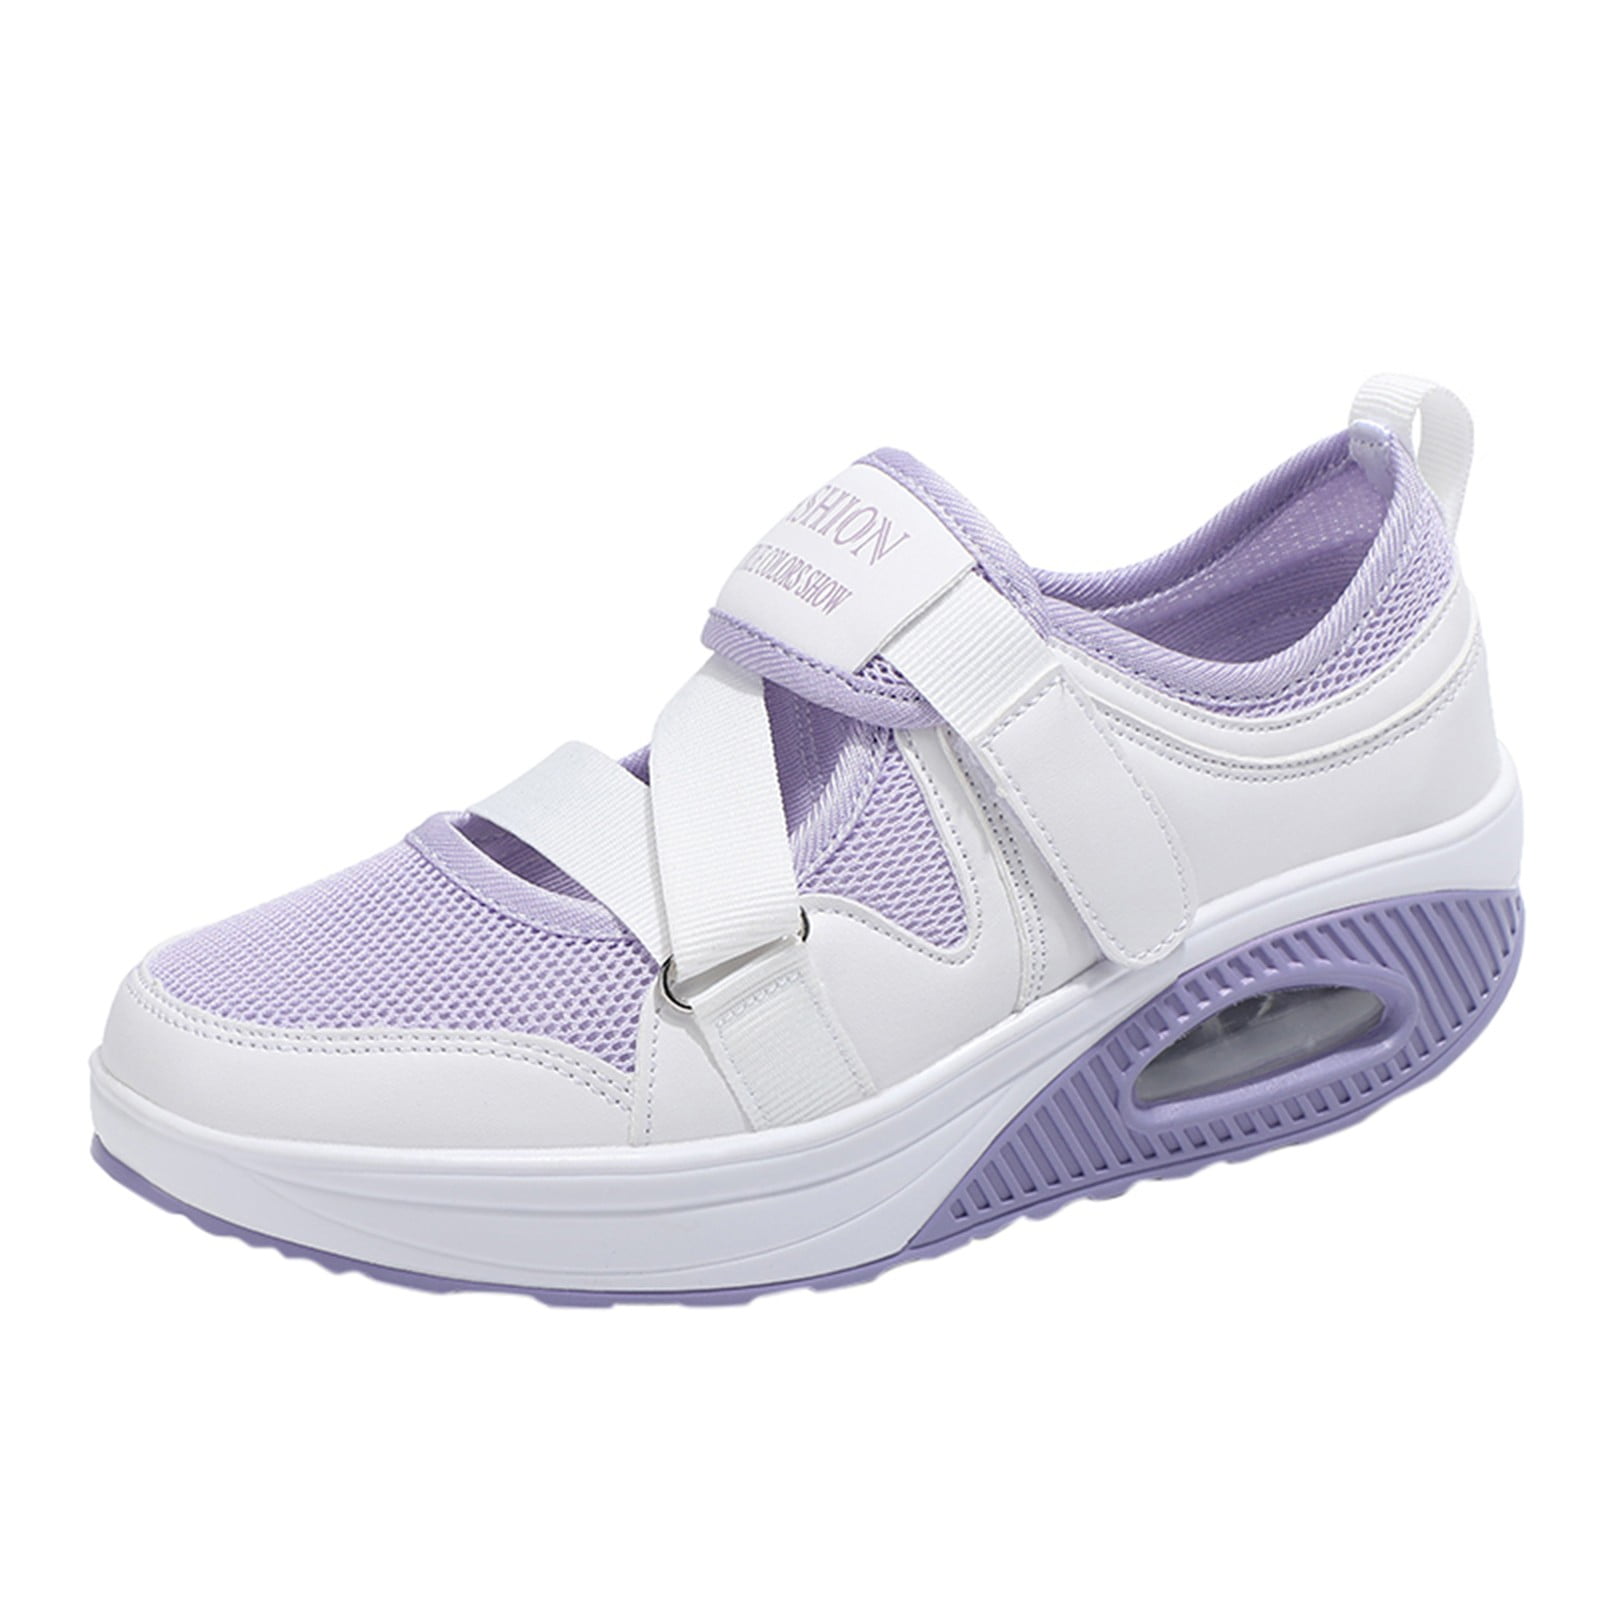 Women's Air Shoes Fashion Sport Gym Jogging Tennis Fitness SneakerSparkly Sneakers For Women Purple 9